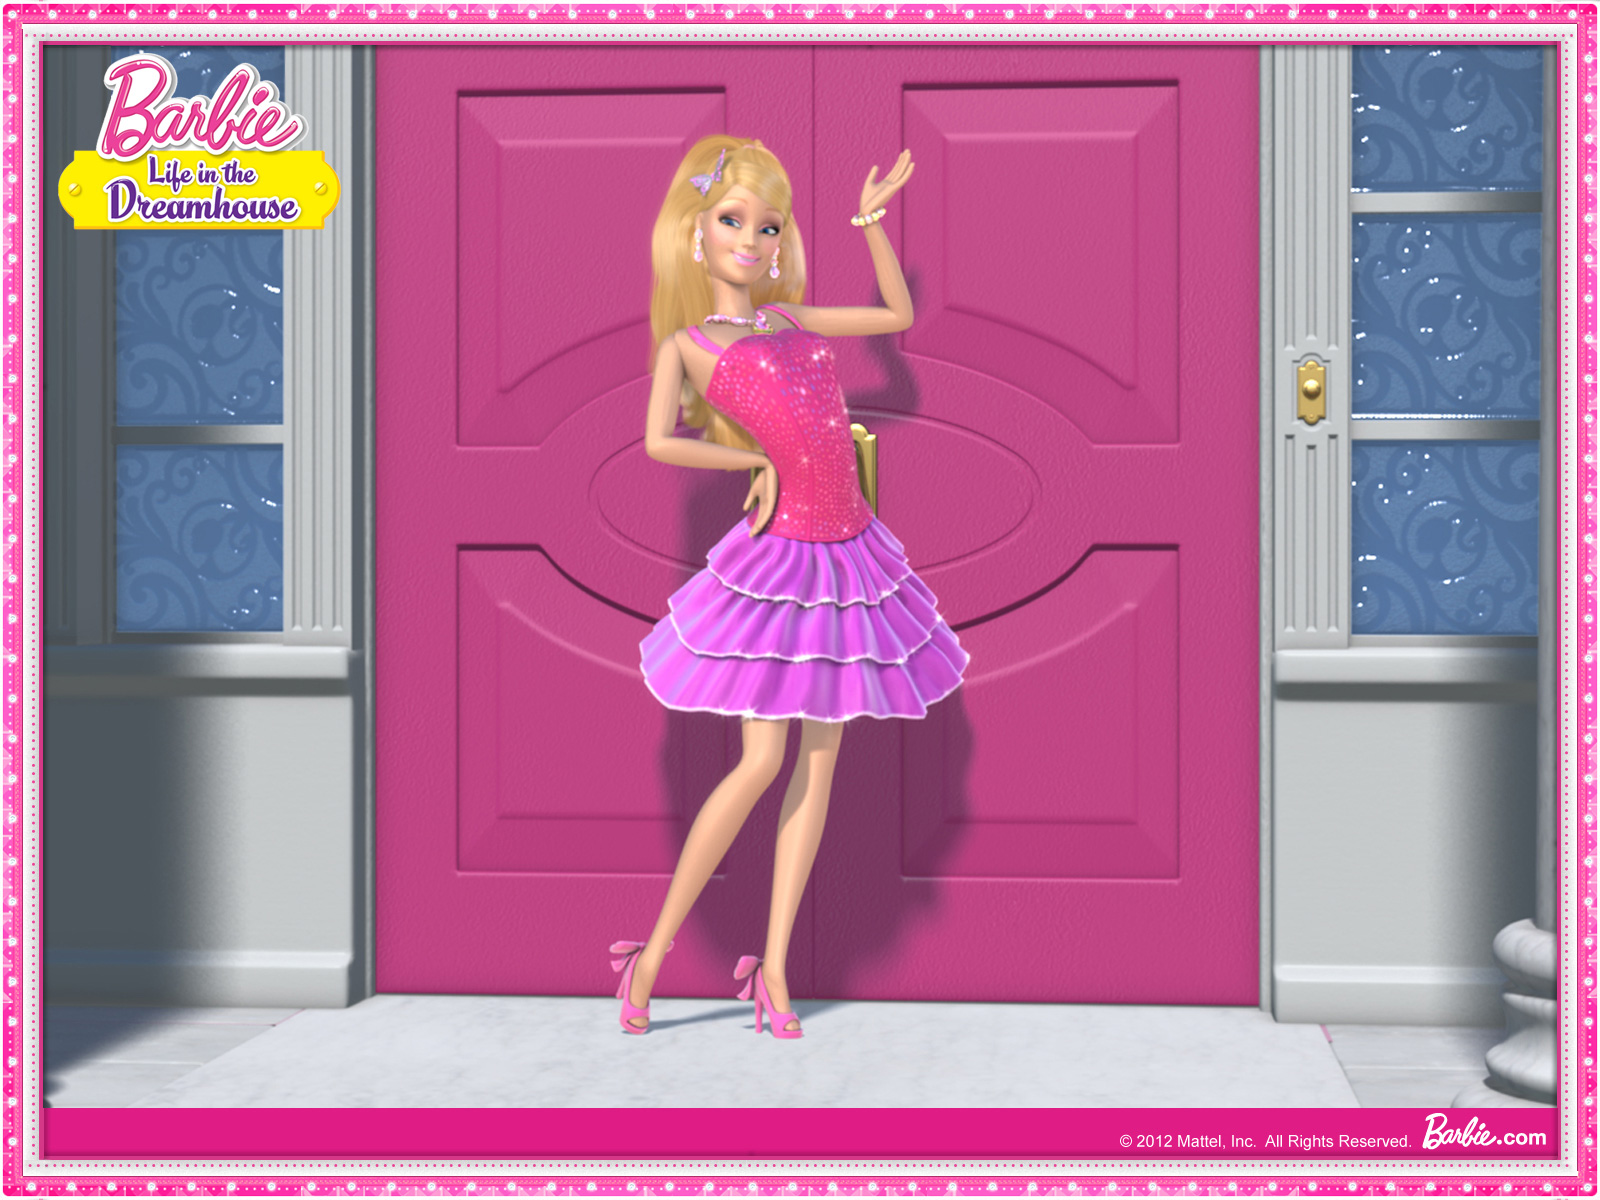 http://images5.fanpop.com/image/photos/30800000/Barbie-Life-in-the-Dramhouse-barbie-movies-30845158-1600-1200.jpg